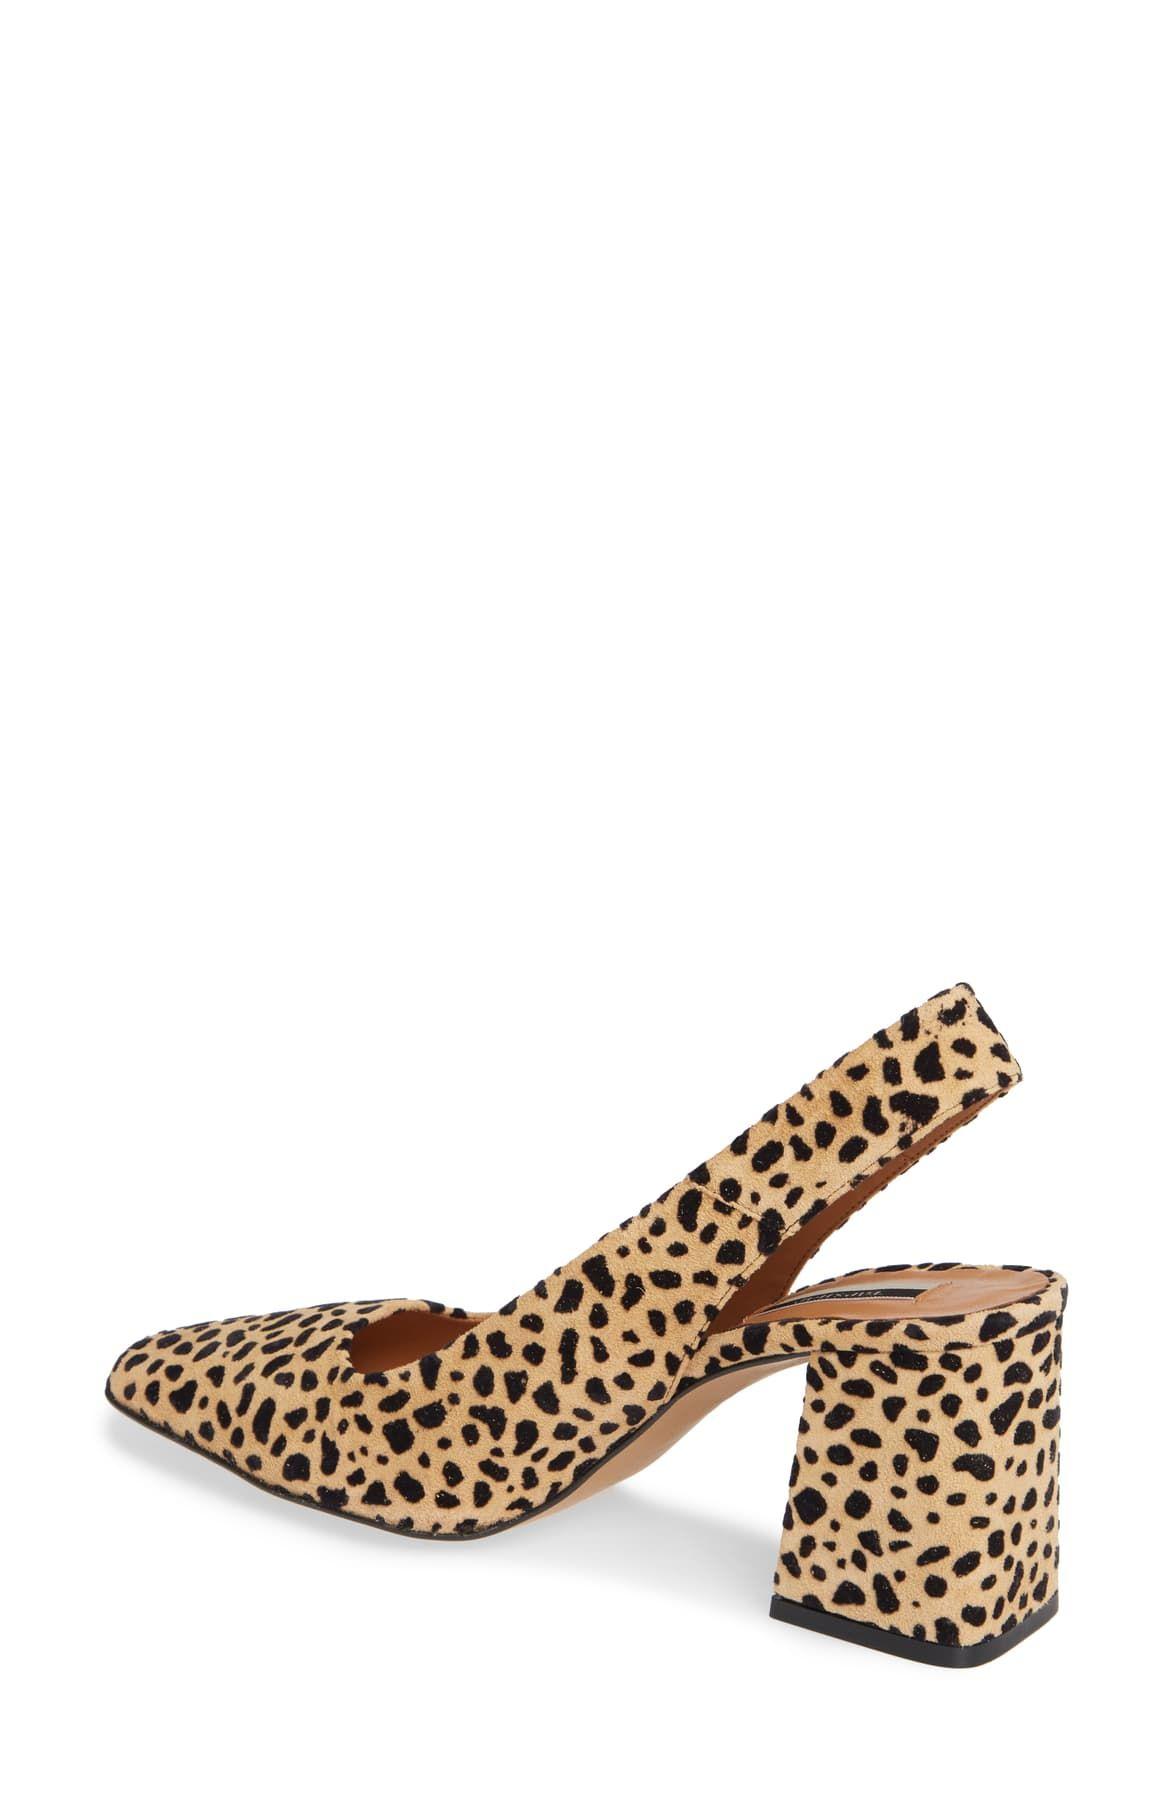 TOPSHOP Gainor Leopard Print Slingback Shoes in Brown - Lyst